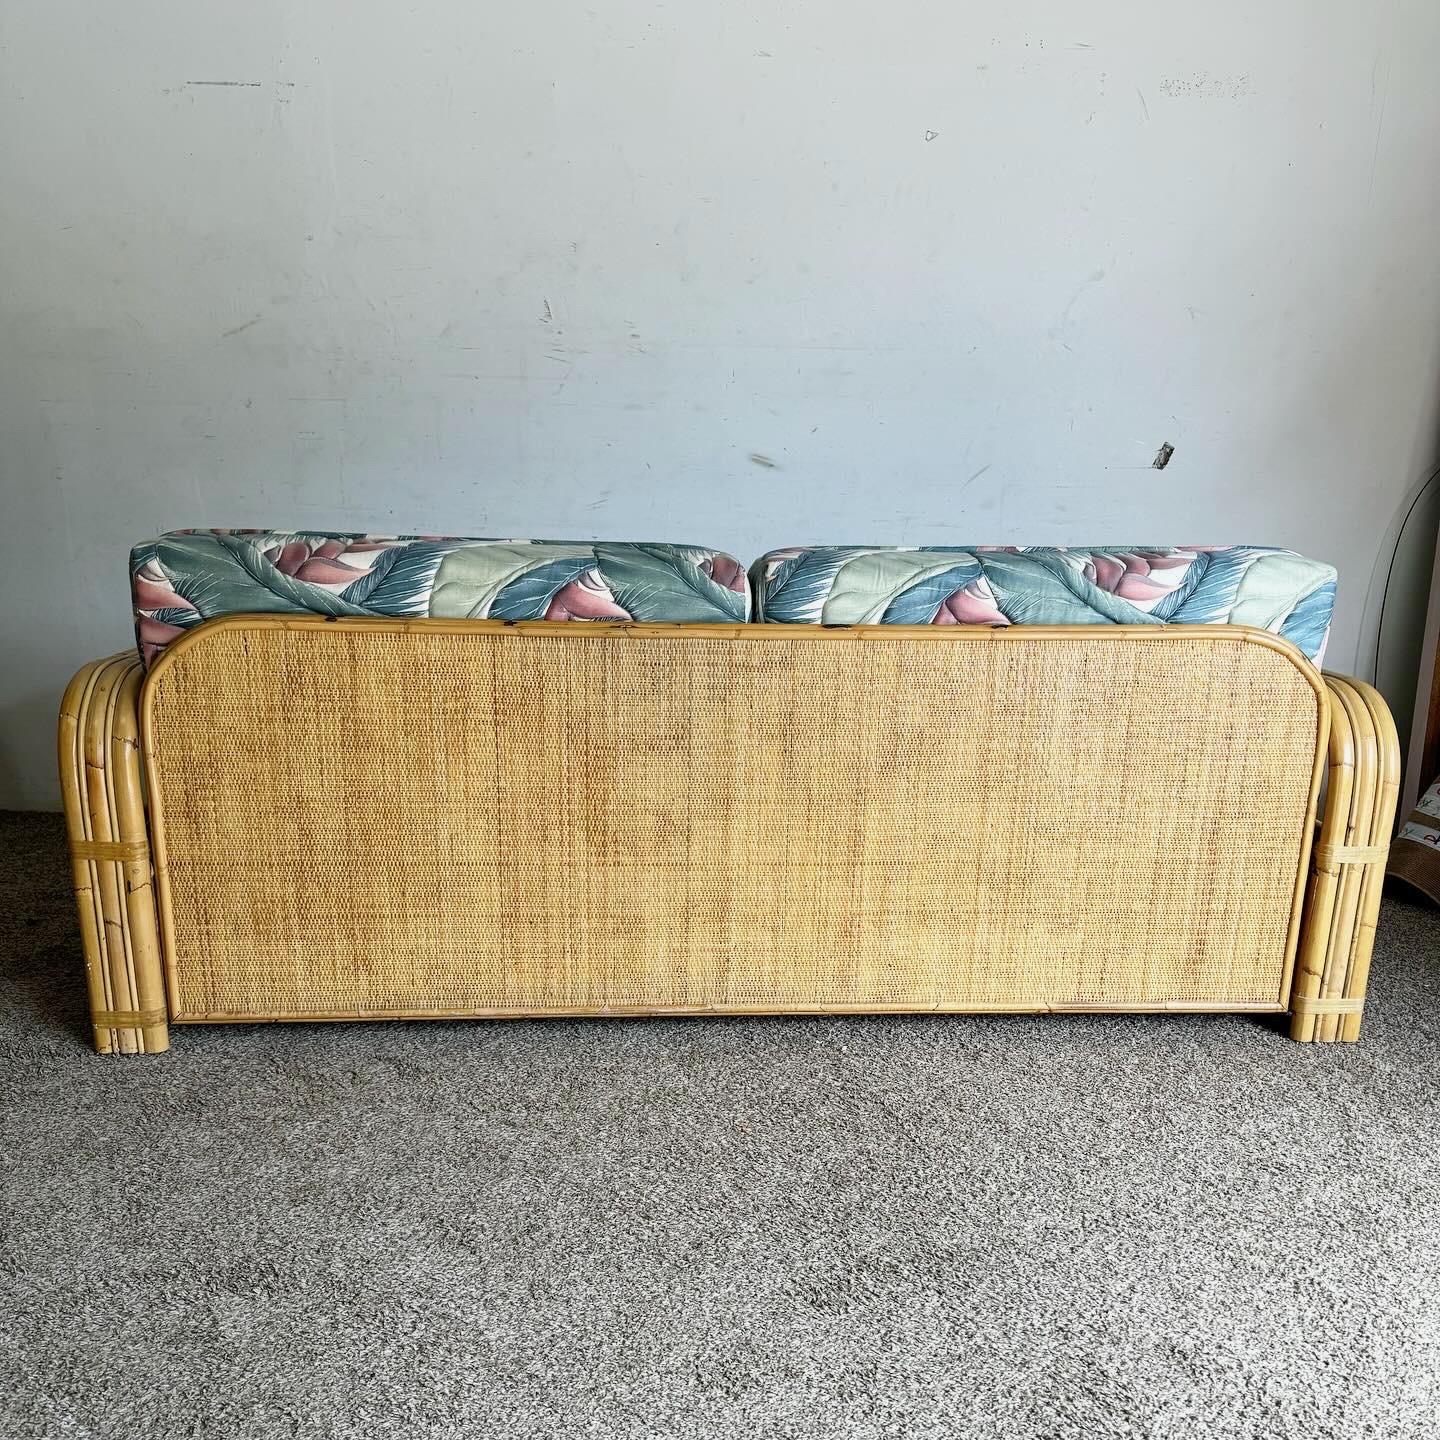 Boho Chic Bamboo Rattan Day Bed With Pull Out Trundle For Sale 1